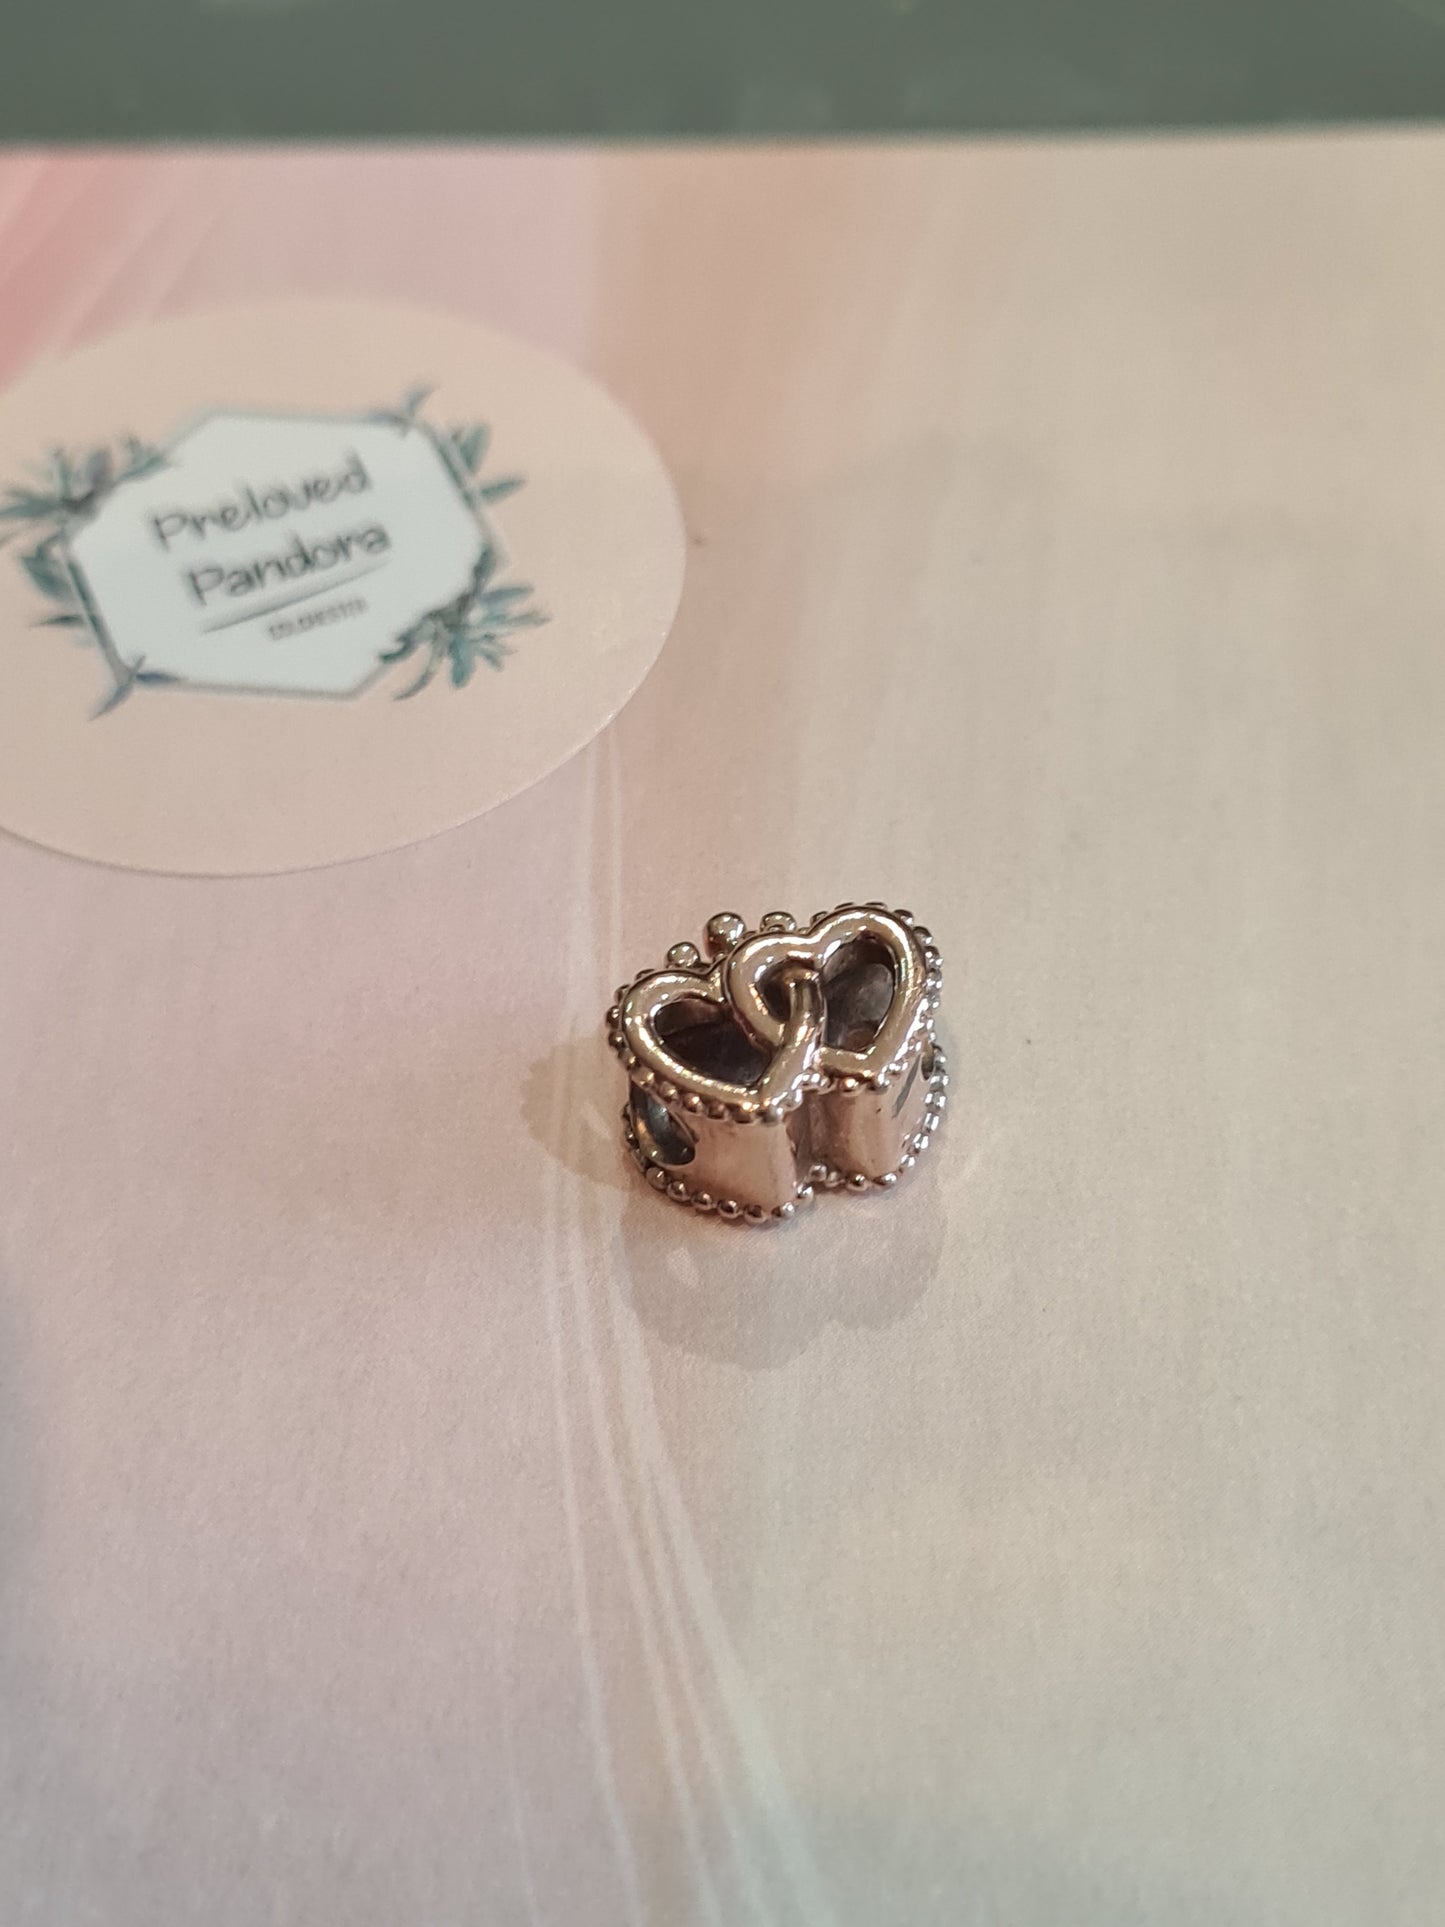 Genuine Pandora Rose Gold Double Heart Charm With Crown